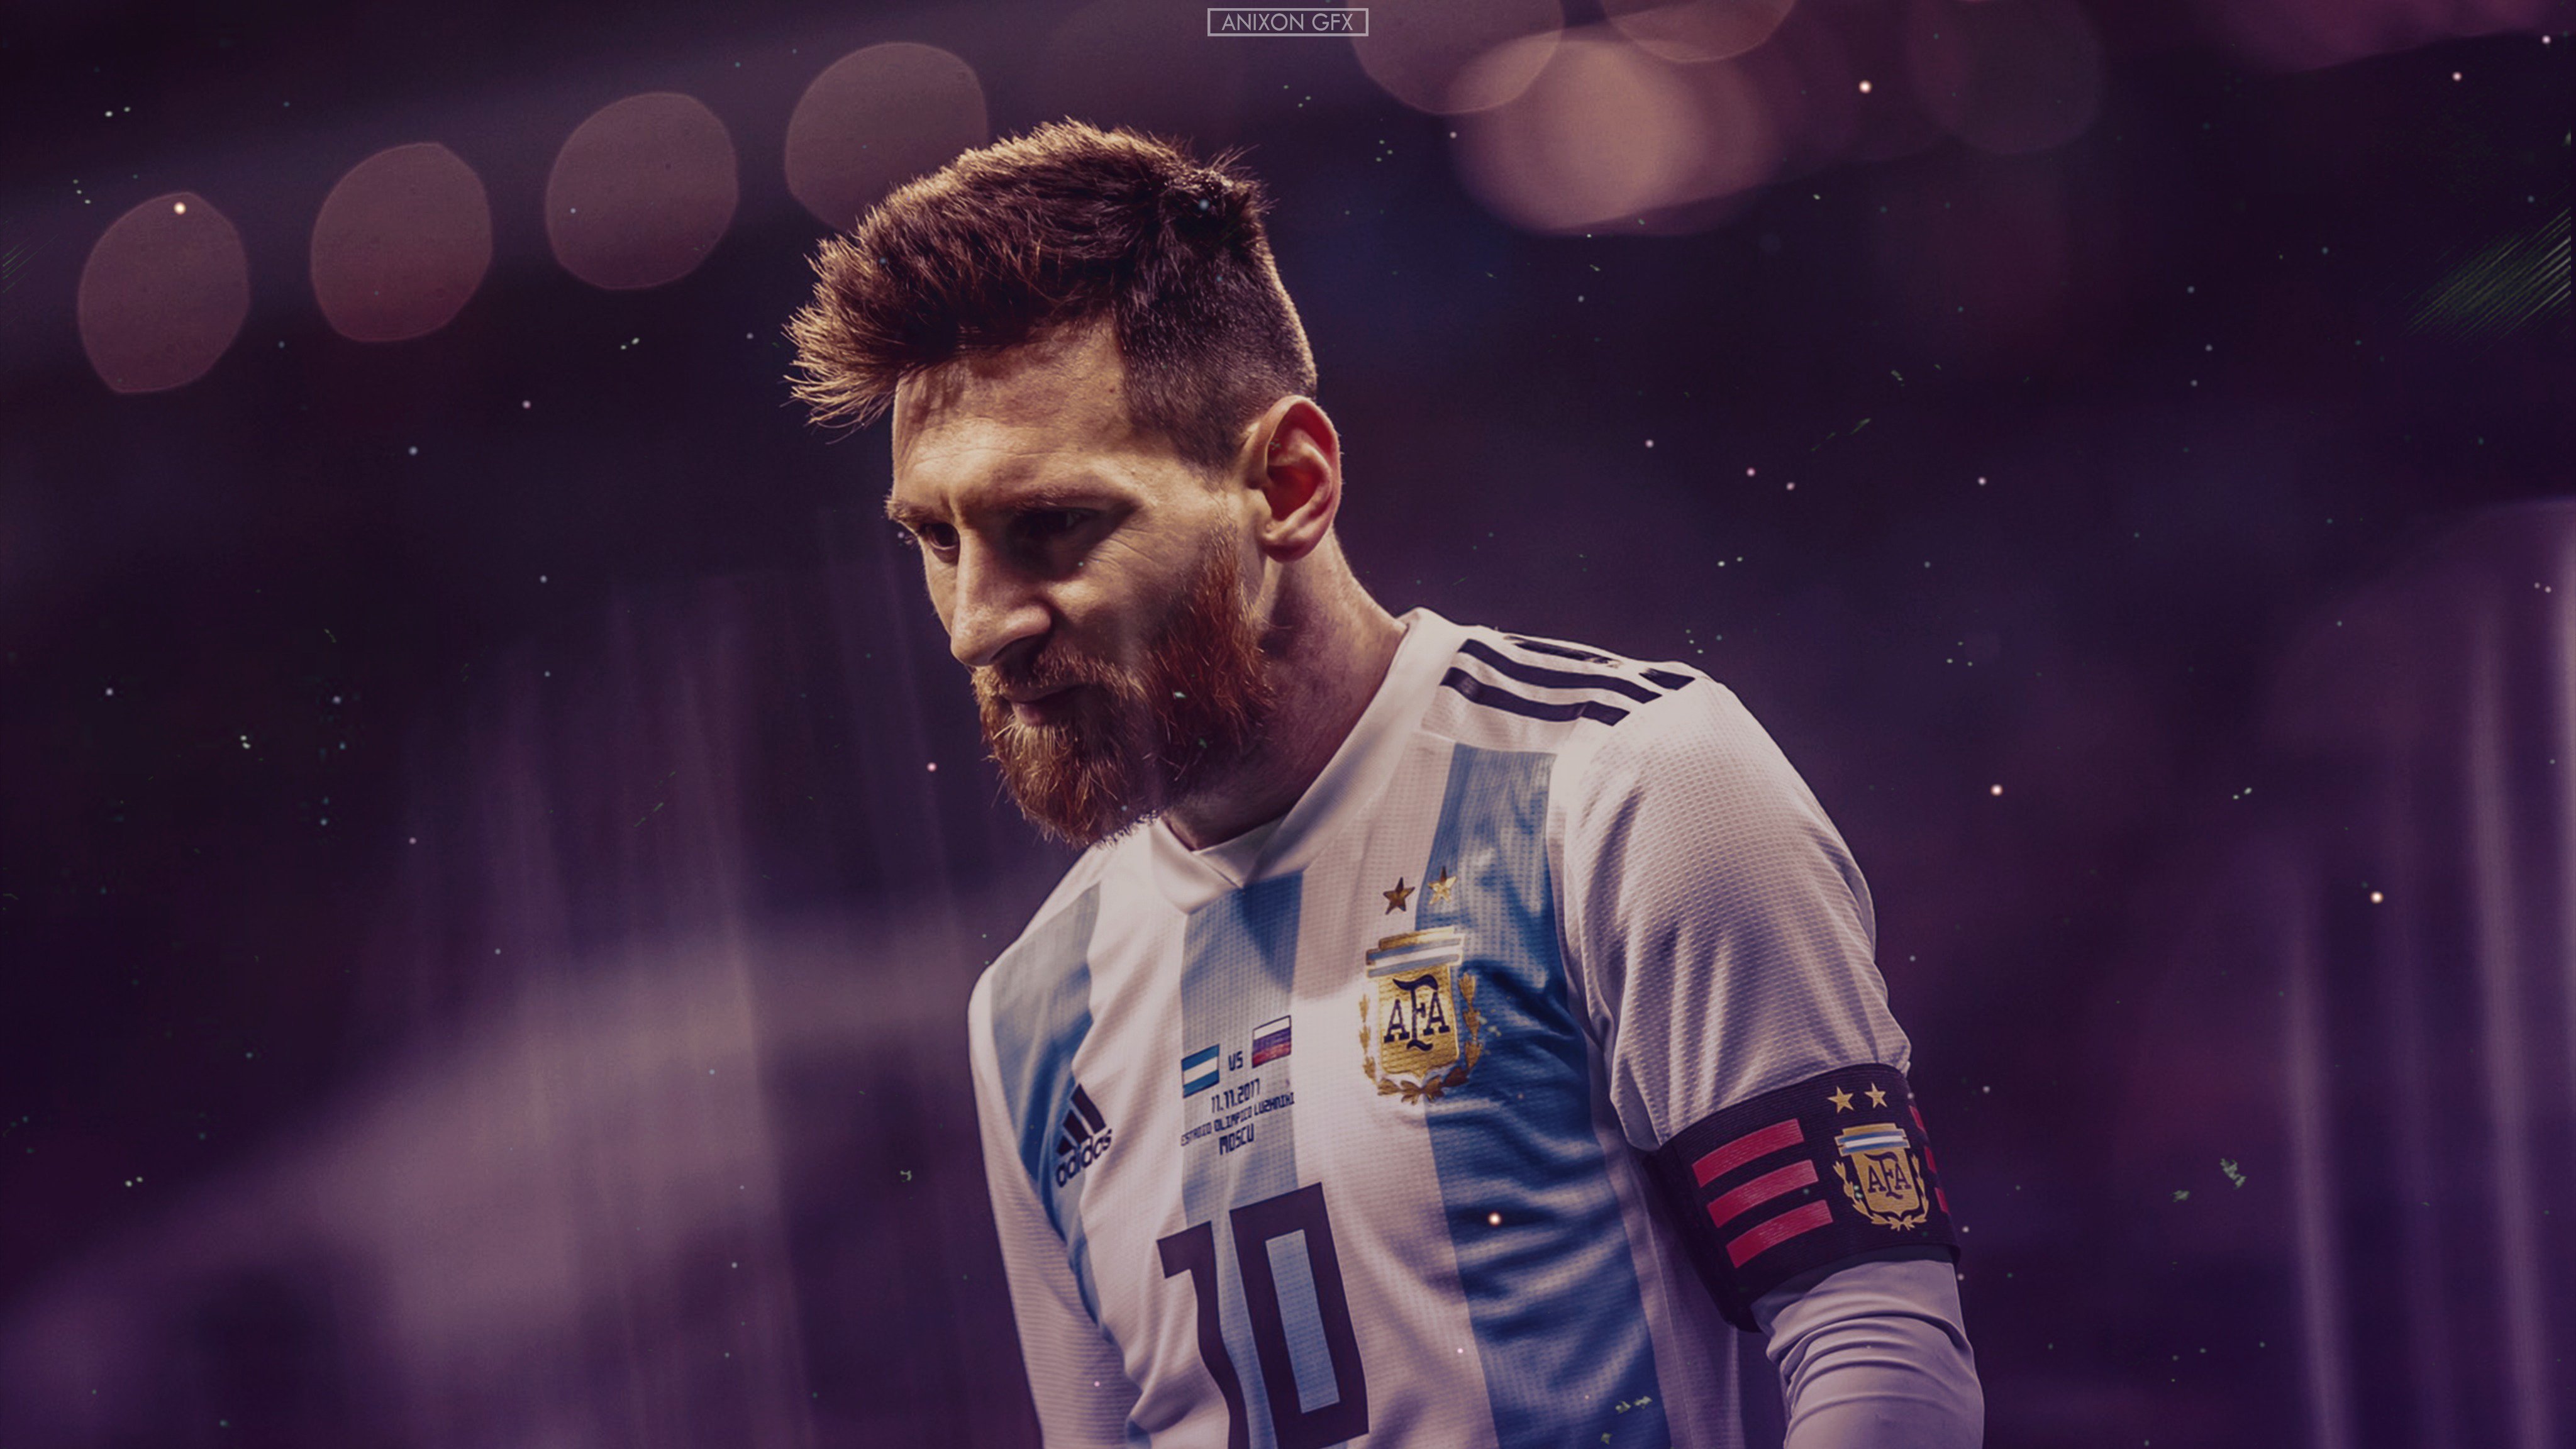 Messi For Pc Wallpapers